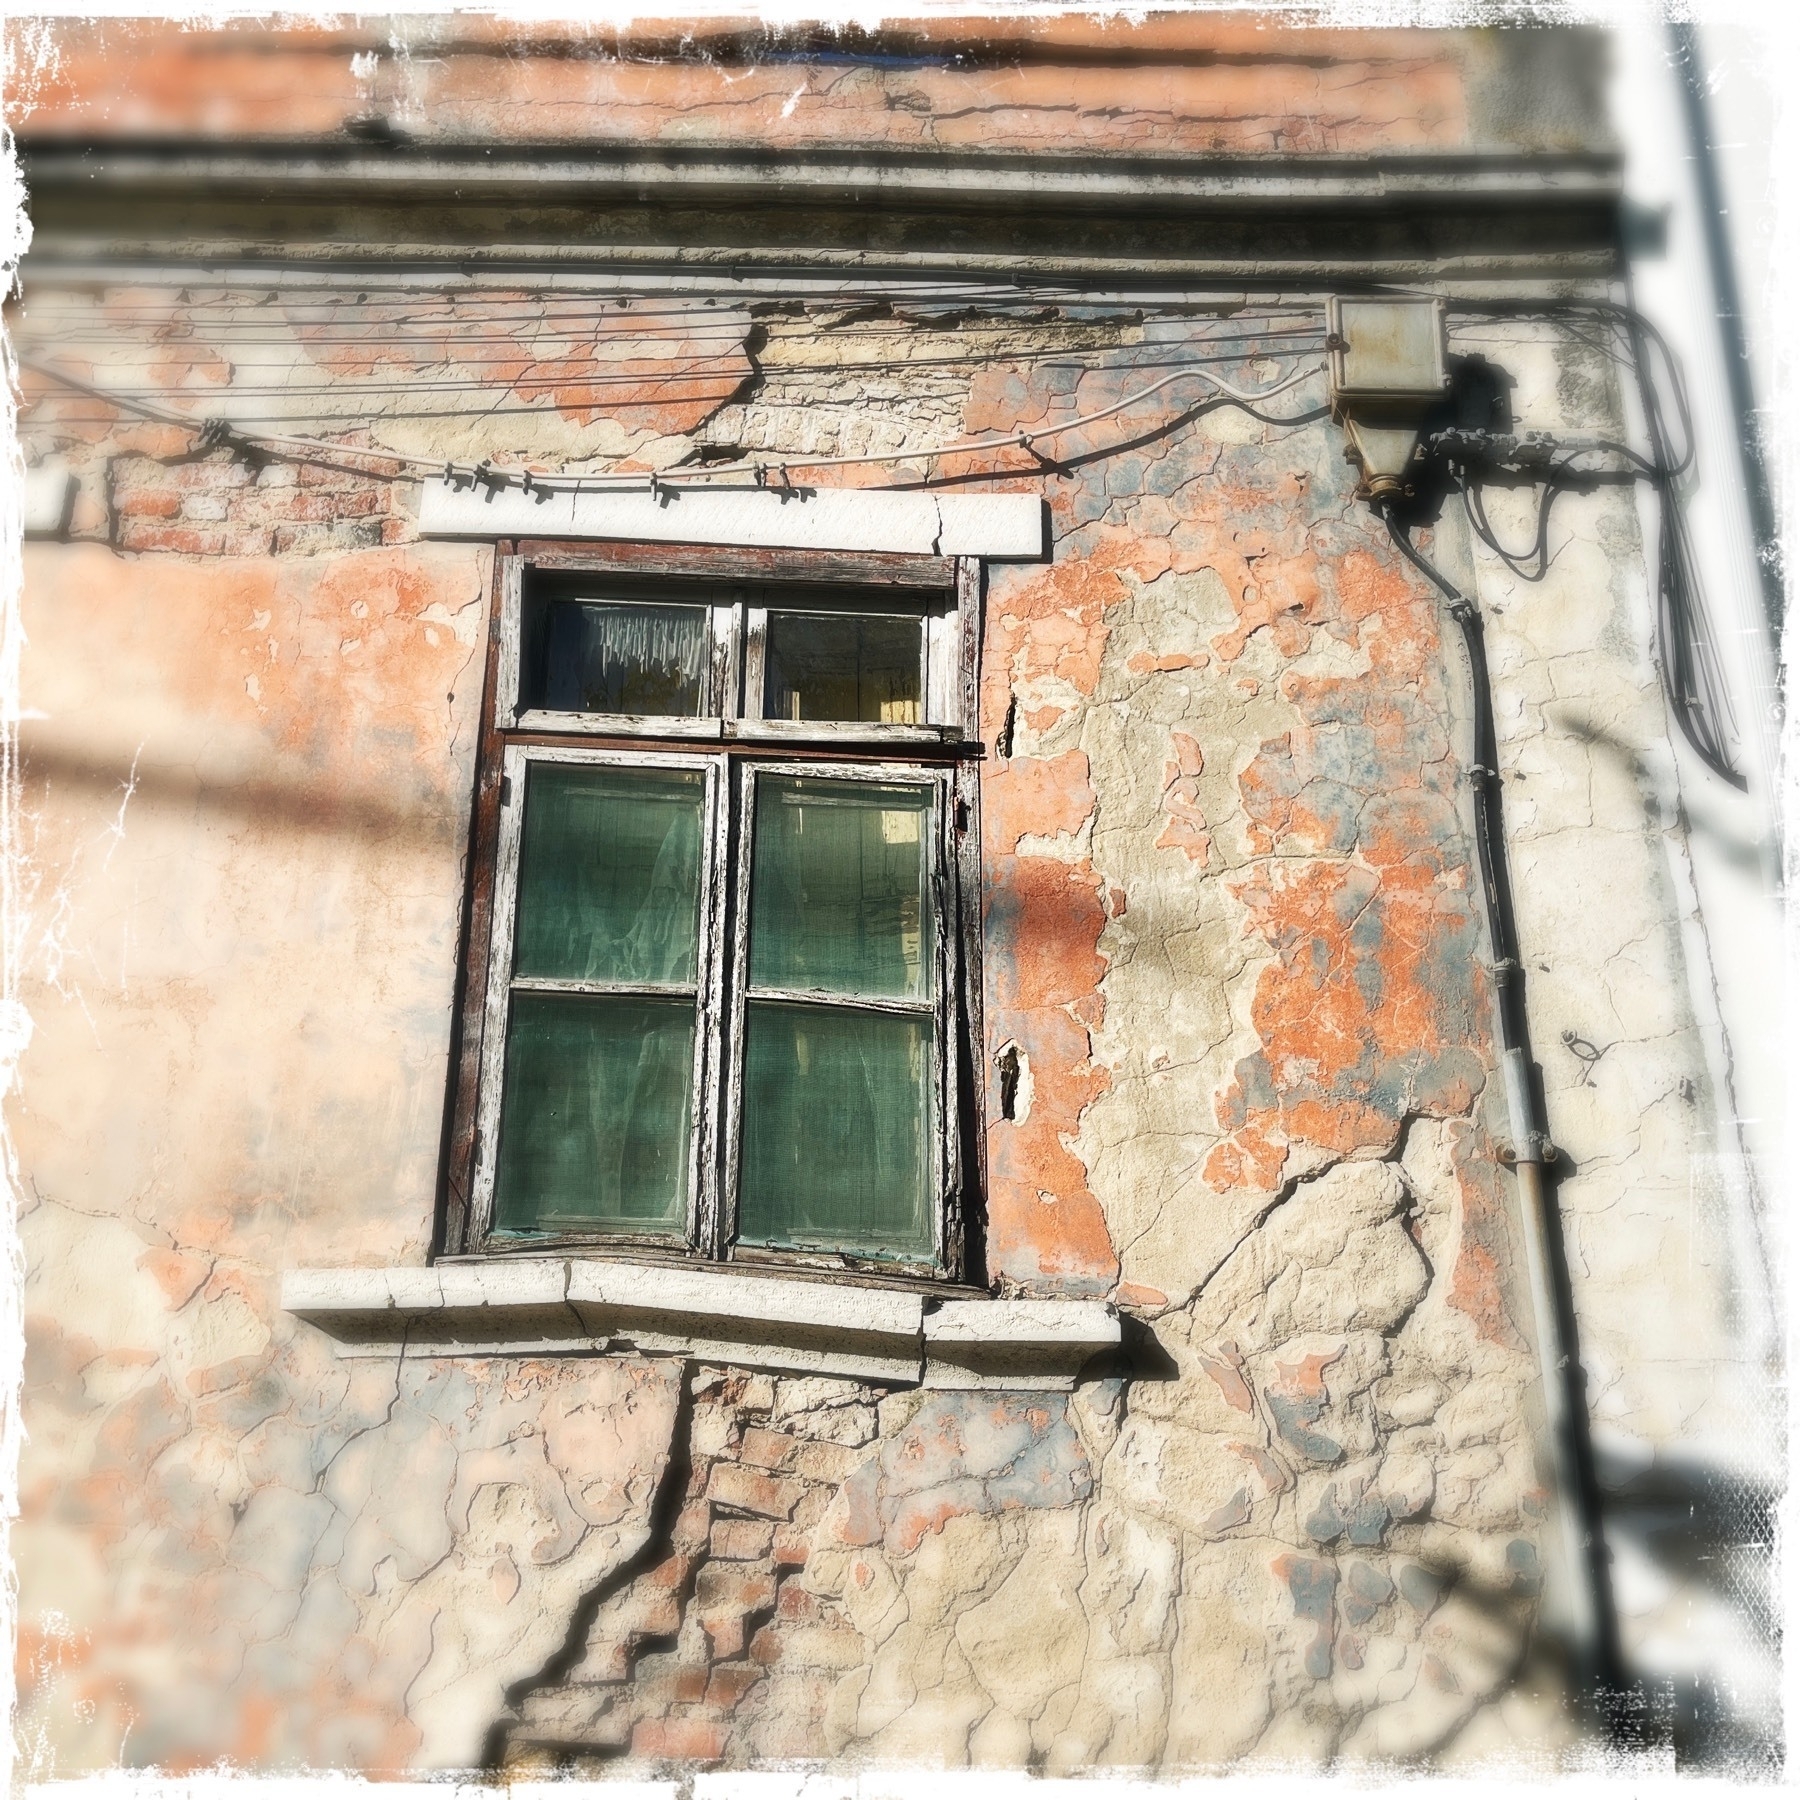 Wonky, ruined window on an old building 